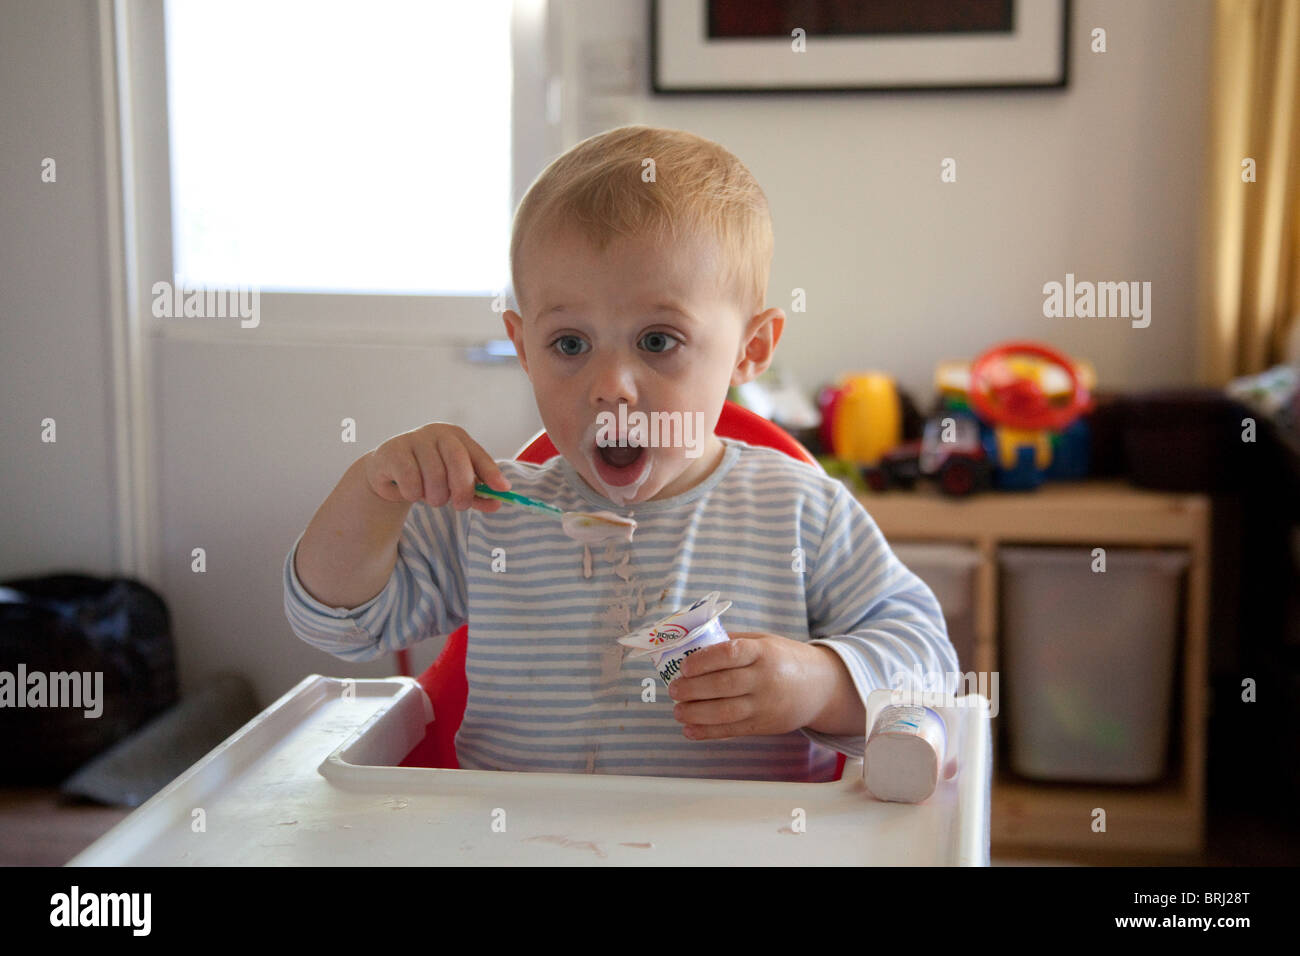 Young boy 16 months old eating a messily eating yogurt. Hampshire, England. Stock Photo